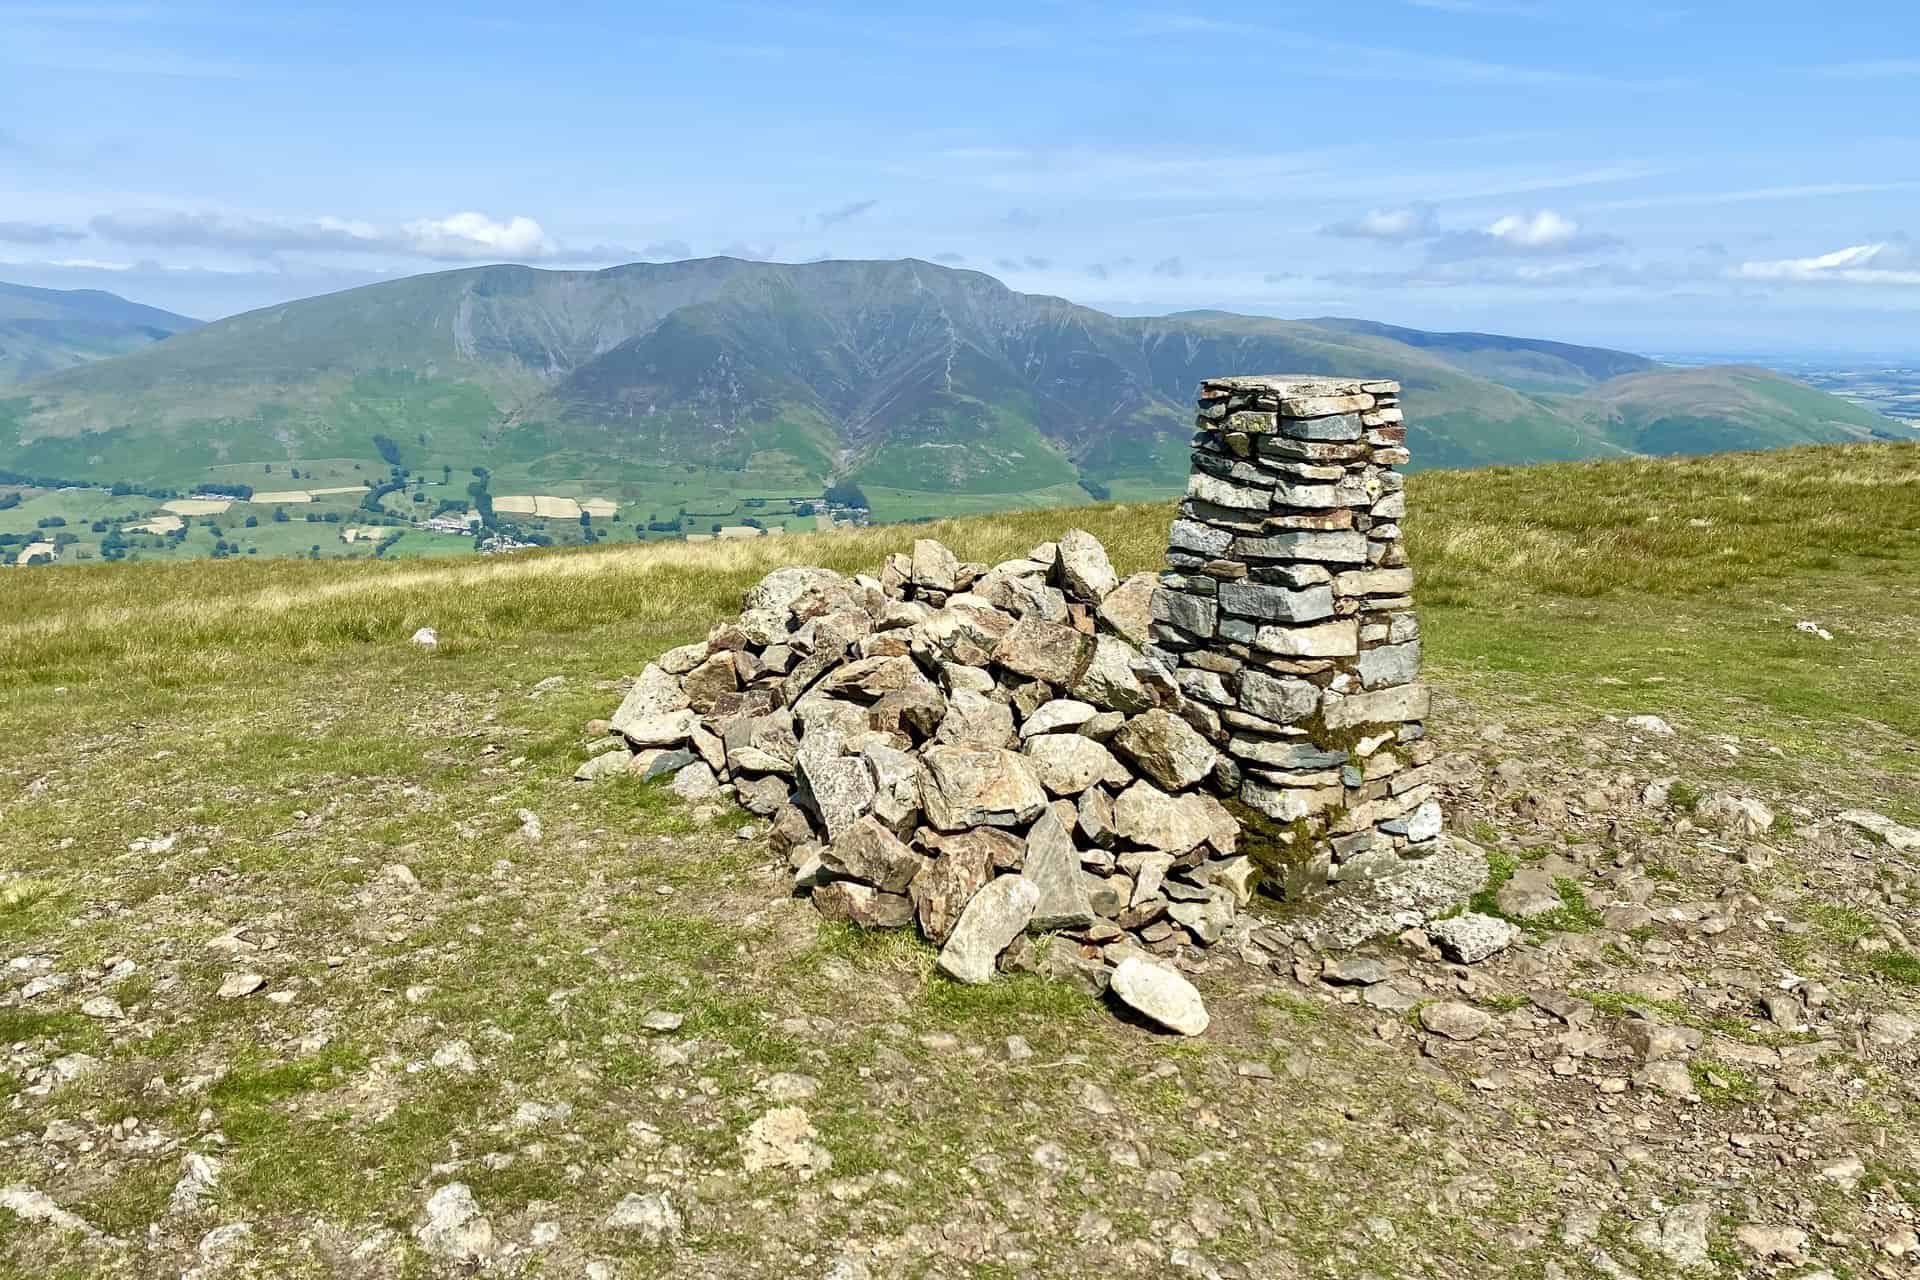 The view of Blencathra from Clough Head.